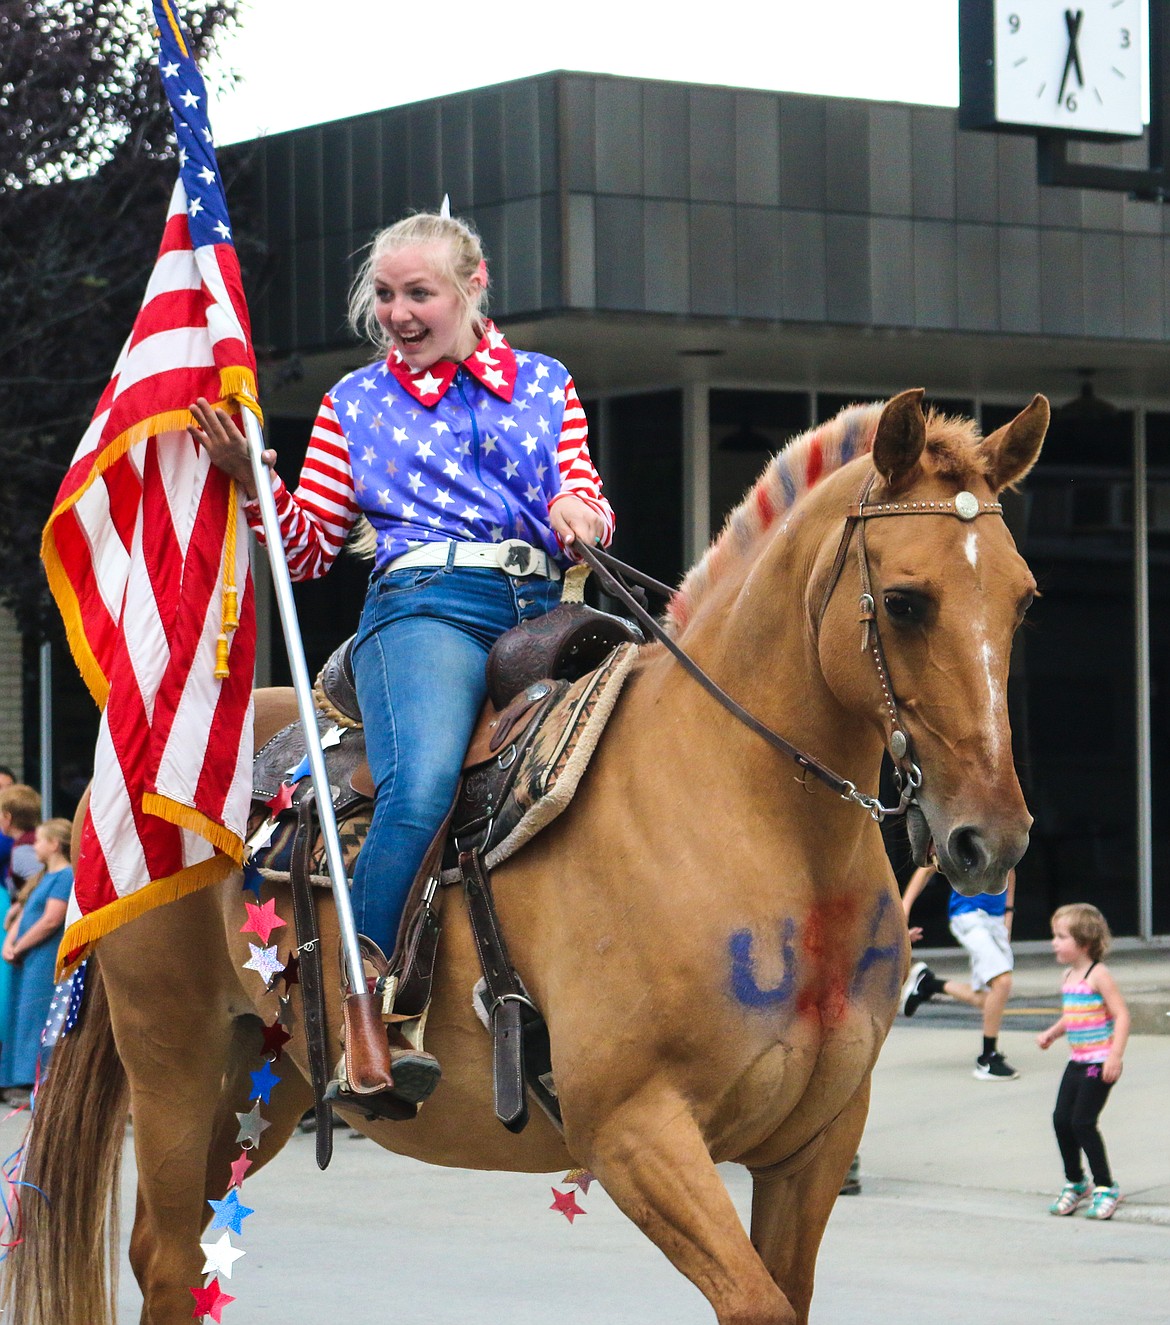 Photo by MANDI BATEMAN
Gracie Adams riding in the Fourth of July parade, showing her country pride.